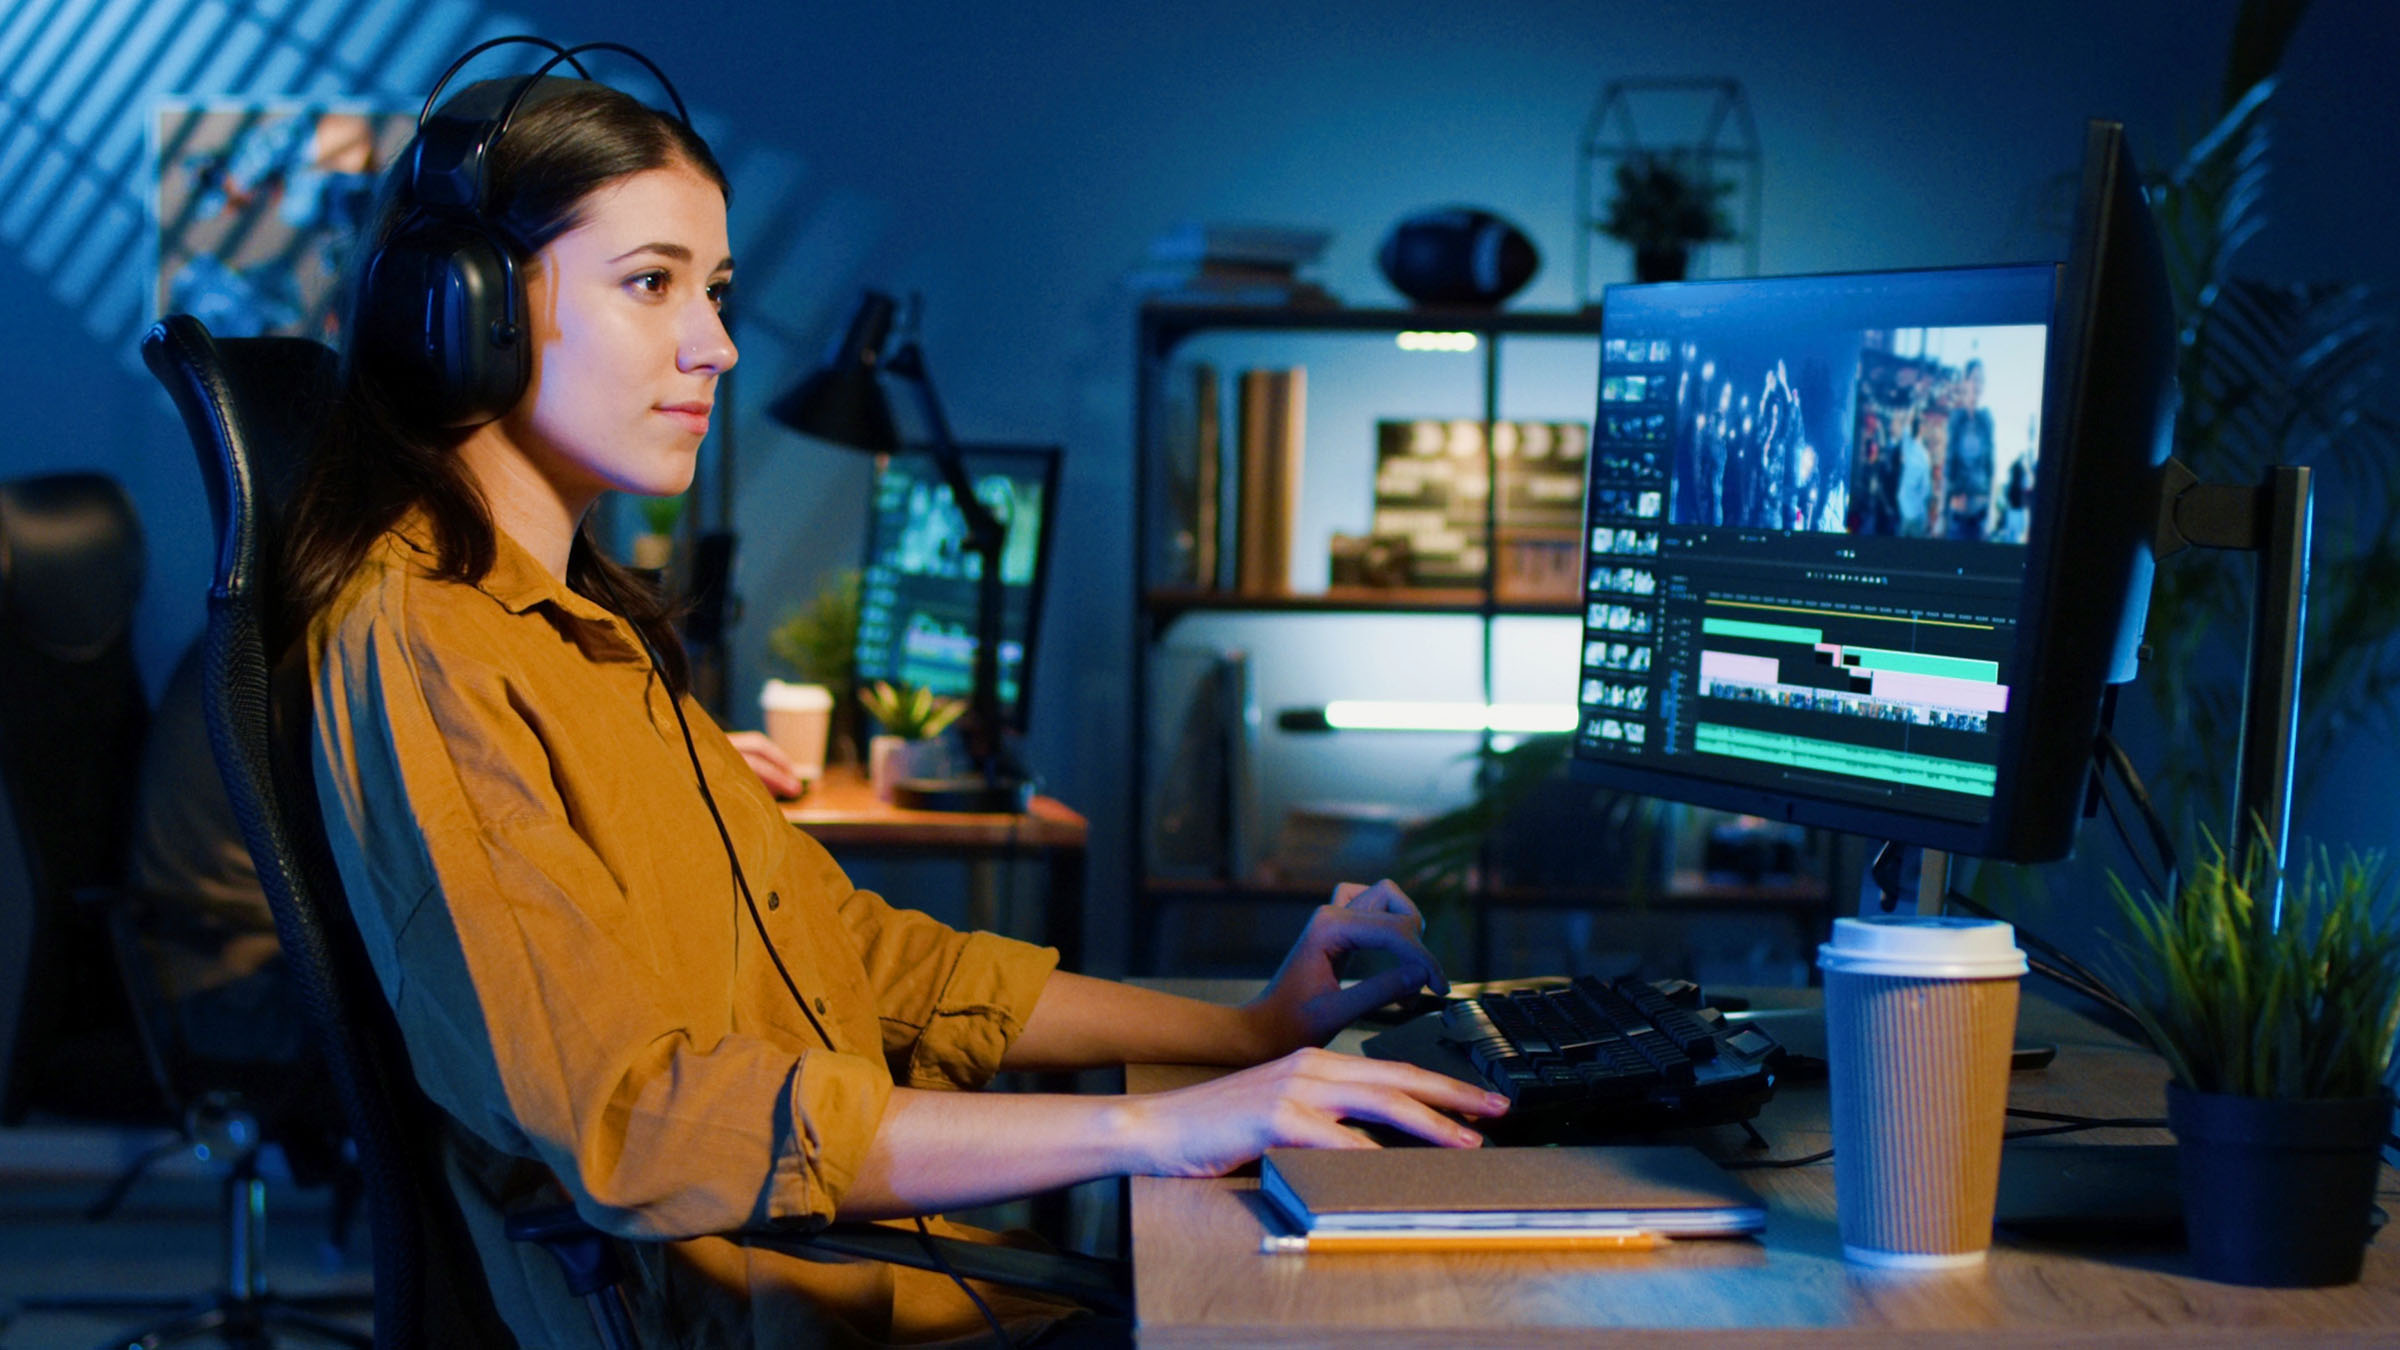 Motion Blur, Faster Trims, and Other Lesser-Known Premiere Pro Tools